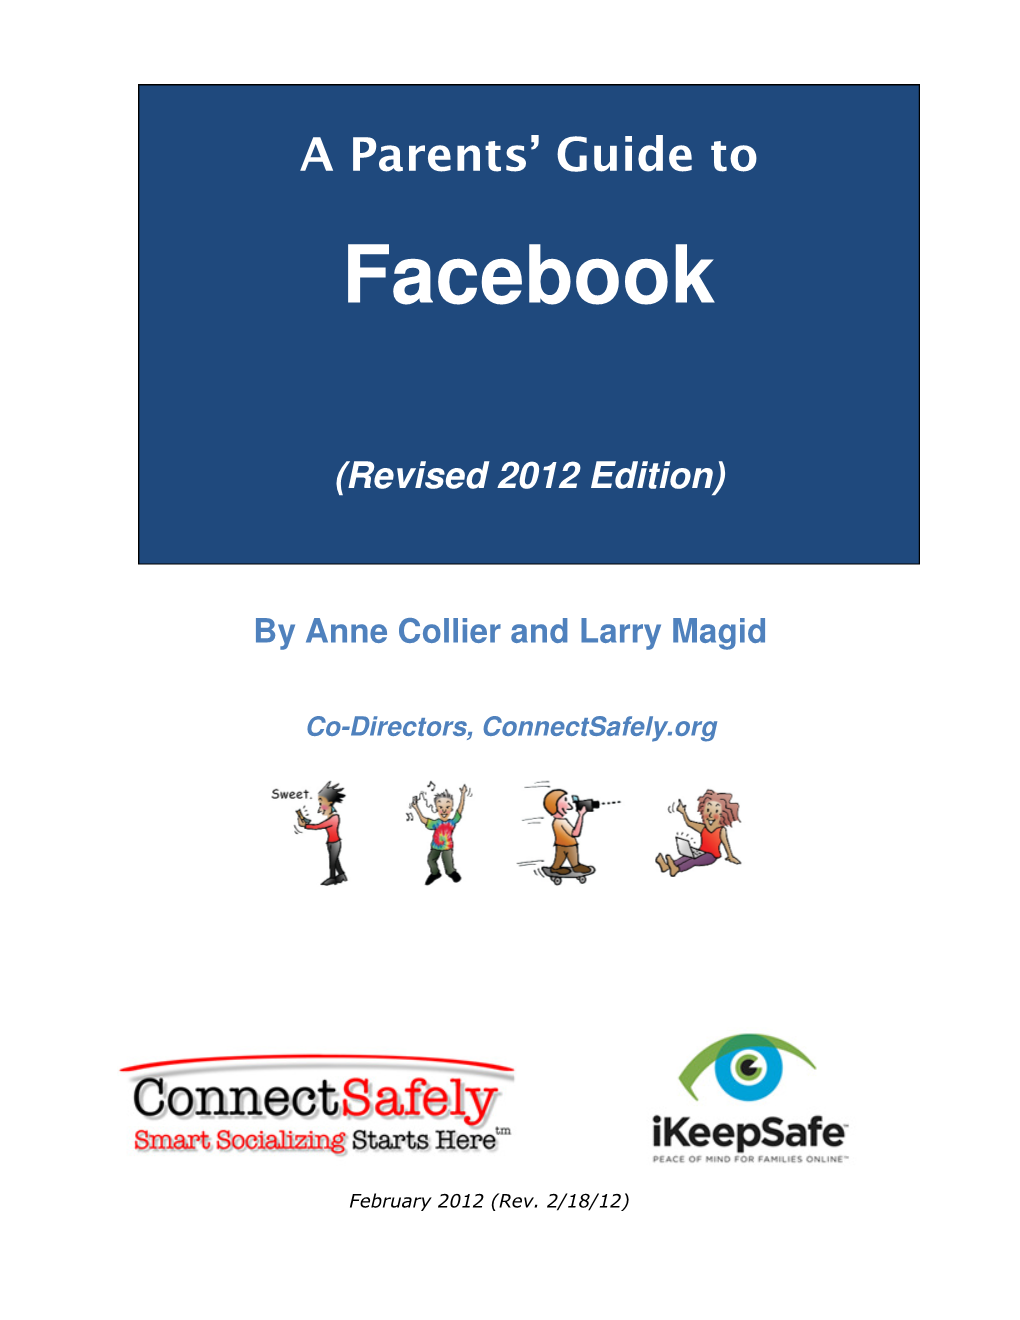 A Parents' Guide to Facebook” Is Online at , and Our Policy for Reprinting Or Reposting Content Is At